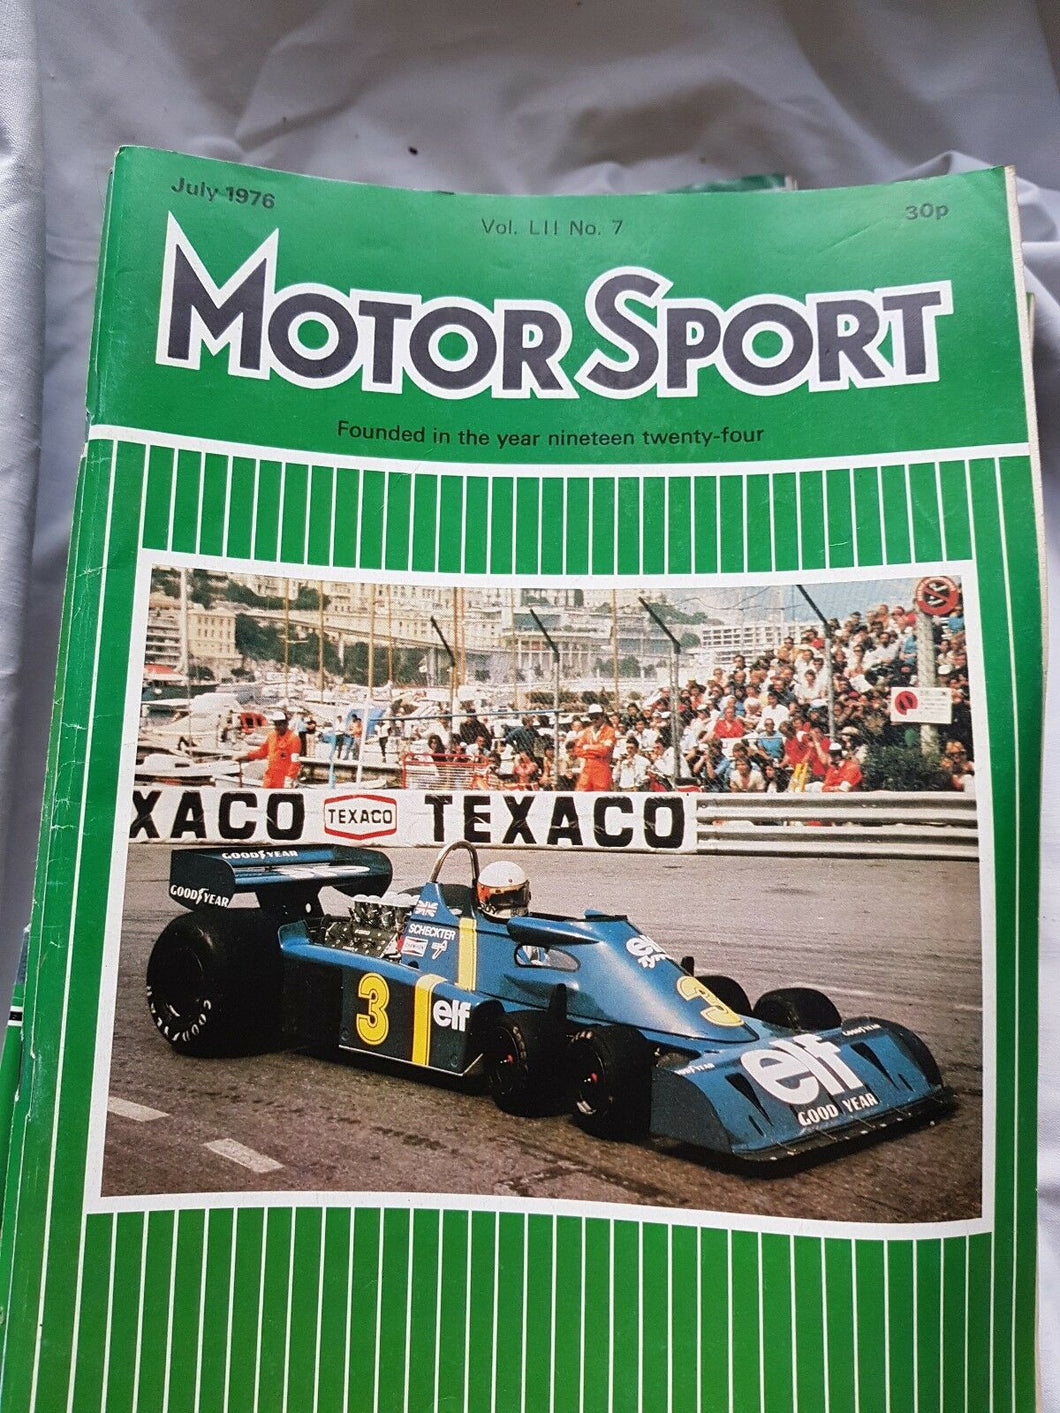 Motorsport July 1976 please see second image for contents